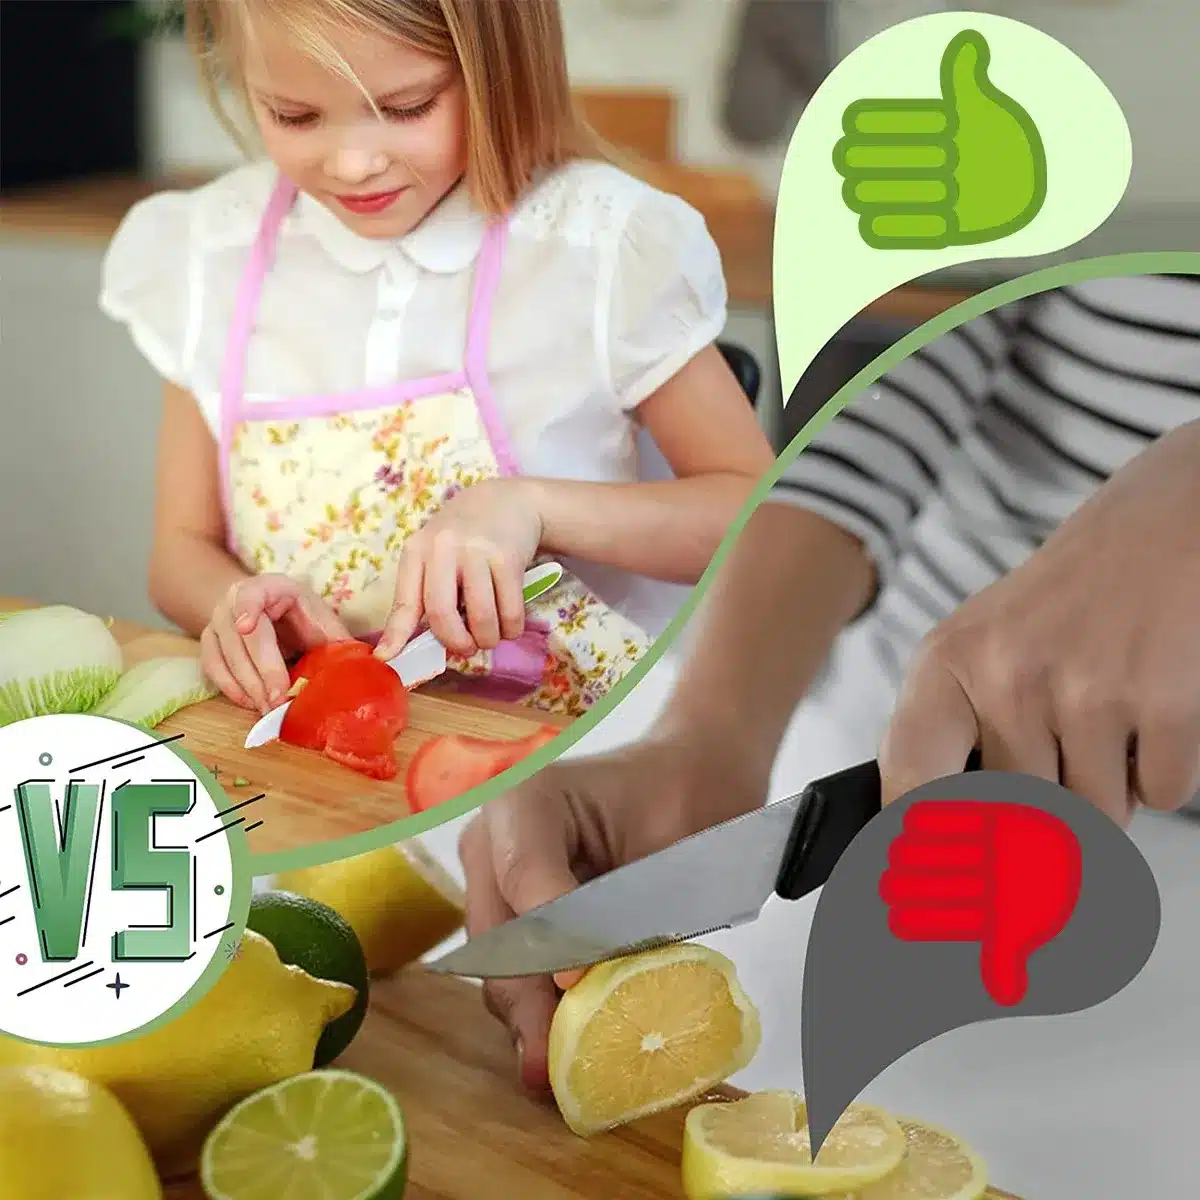 A girl uses the Child's Knife - Set of 13 Kitchen Tools Suitable for Children to chop vegetables on a chopping board.